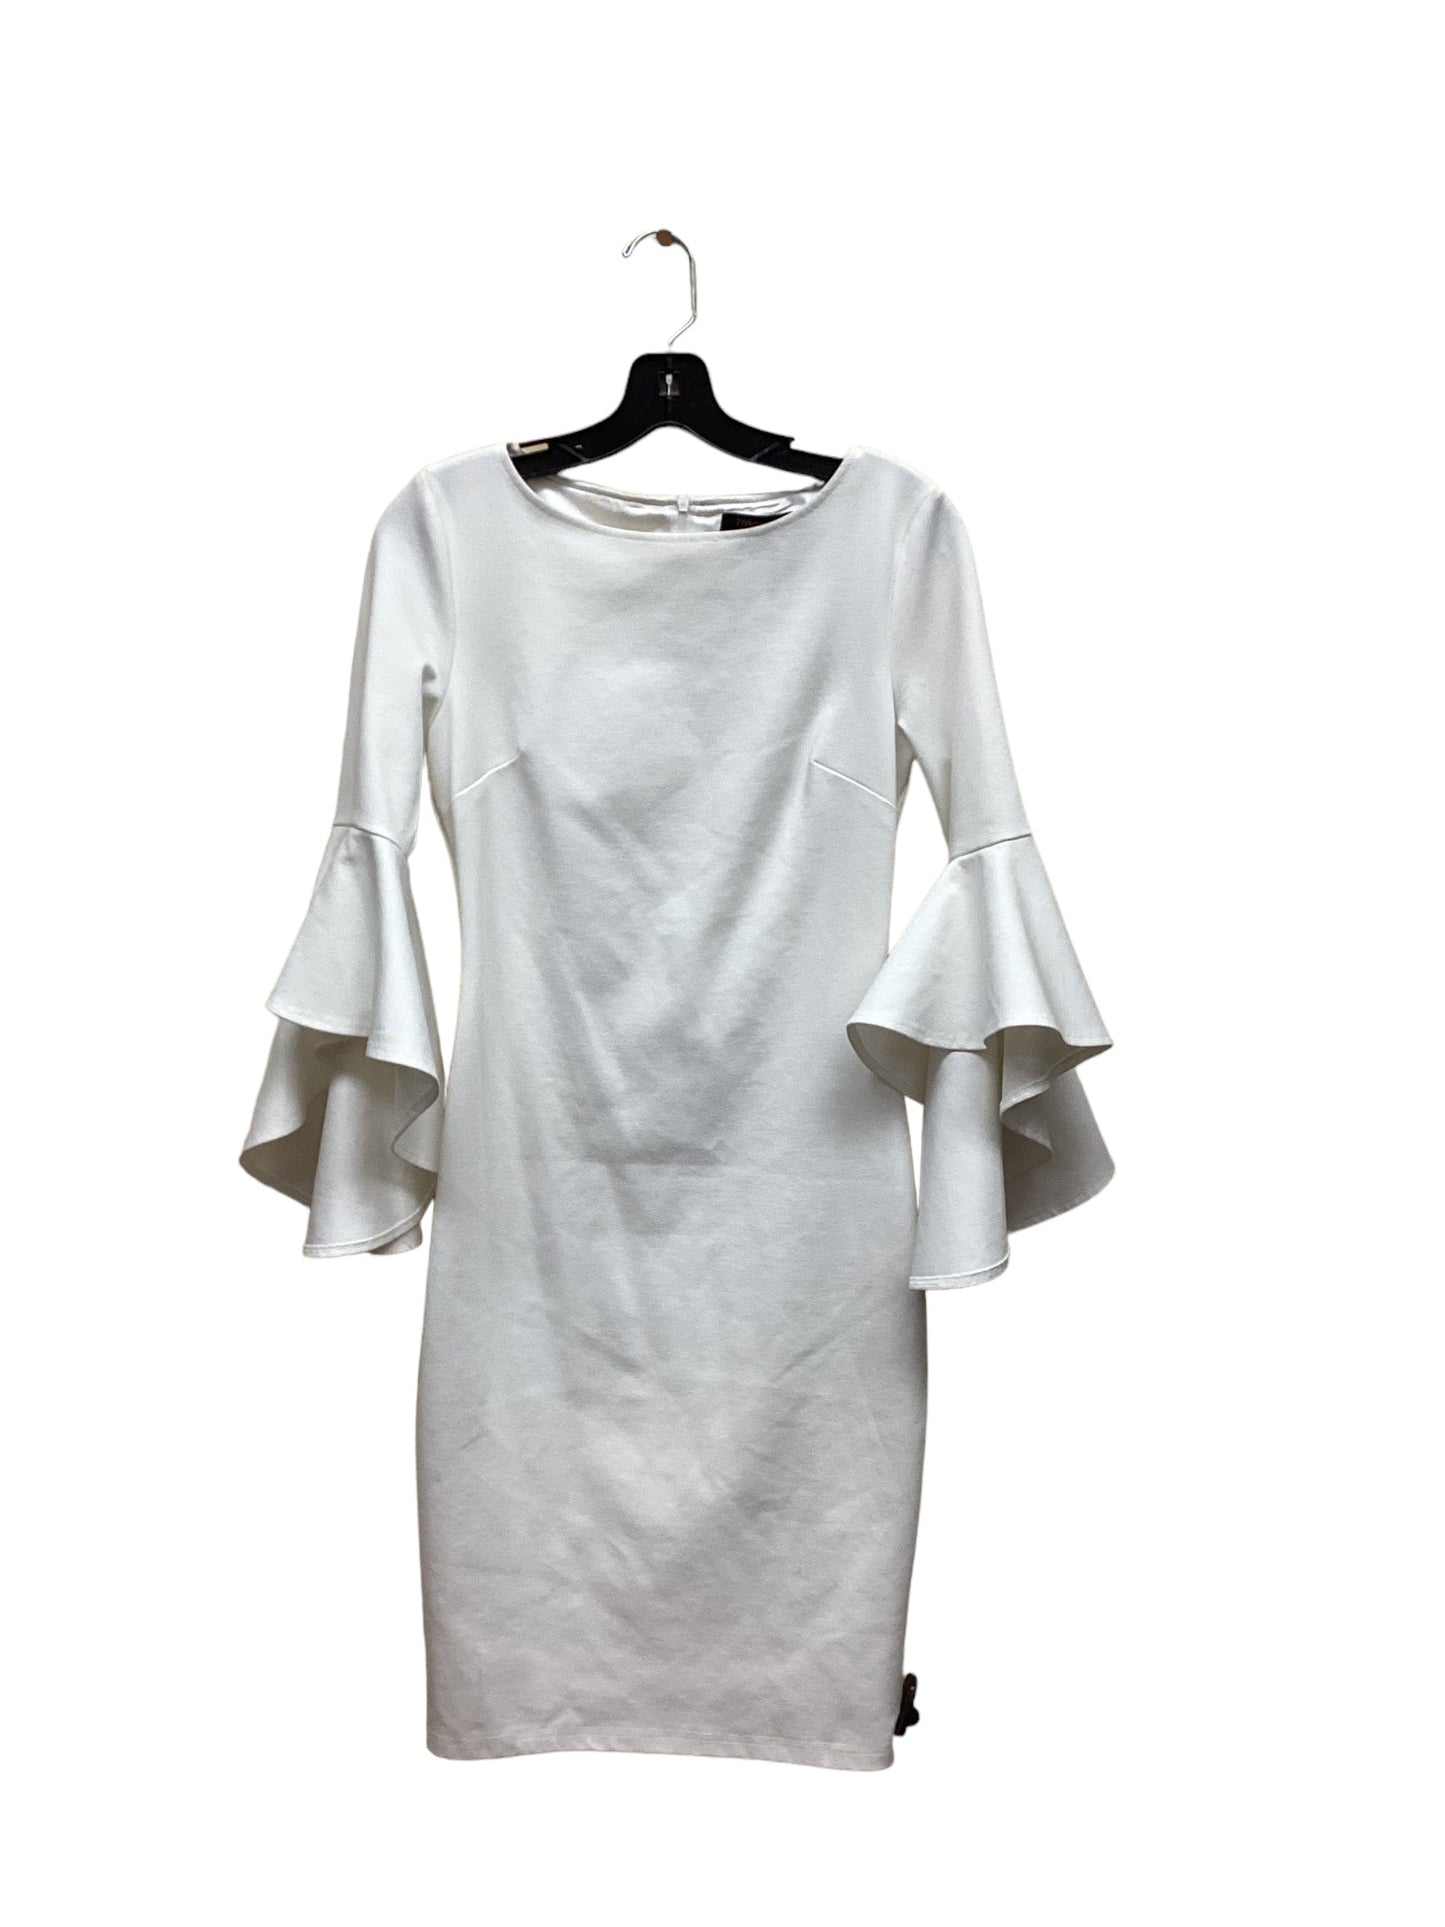 White Dress Casual Midi Clothes Mentor, Size S